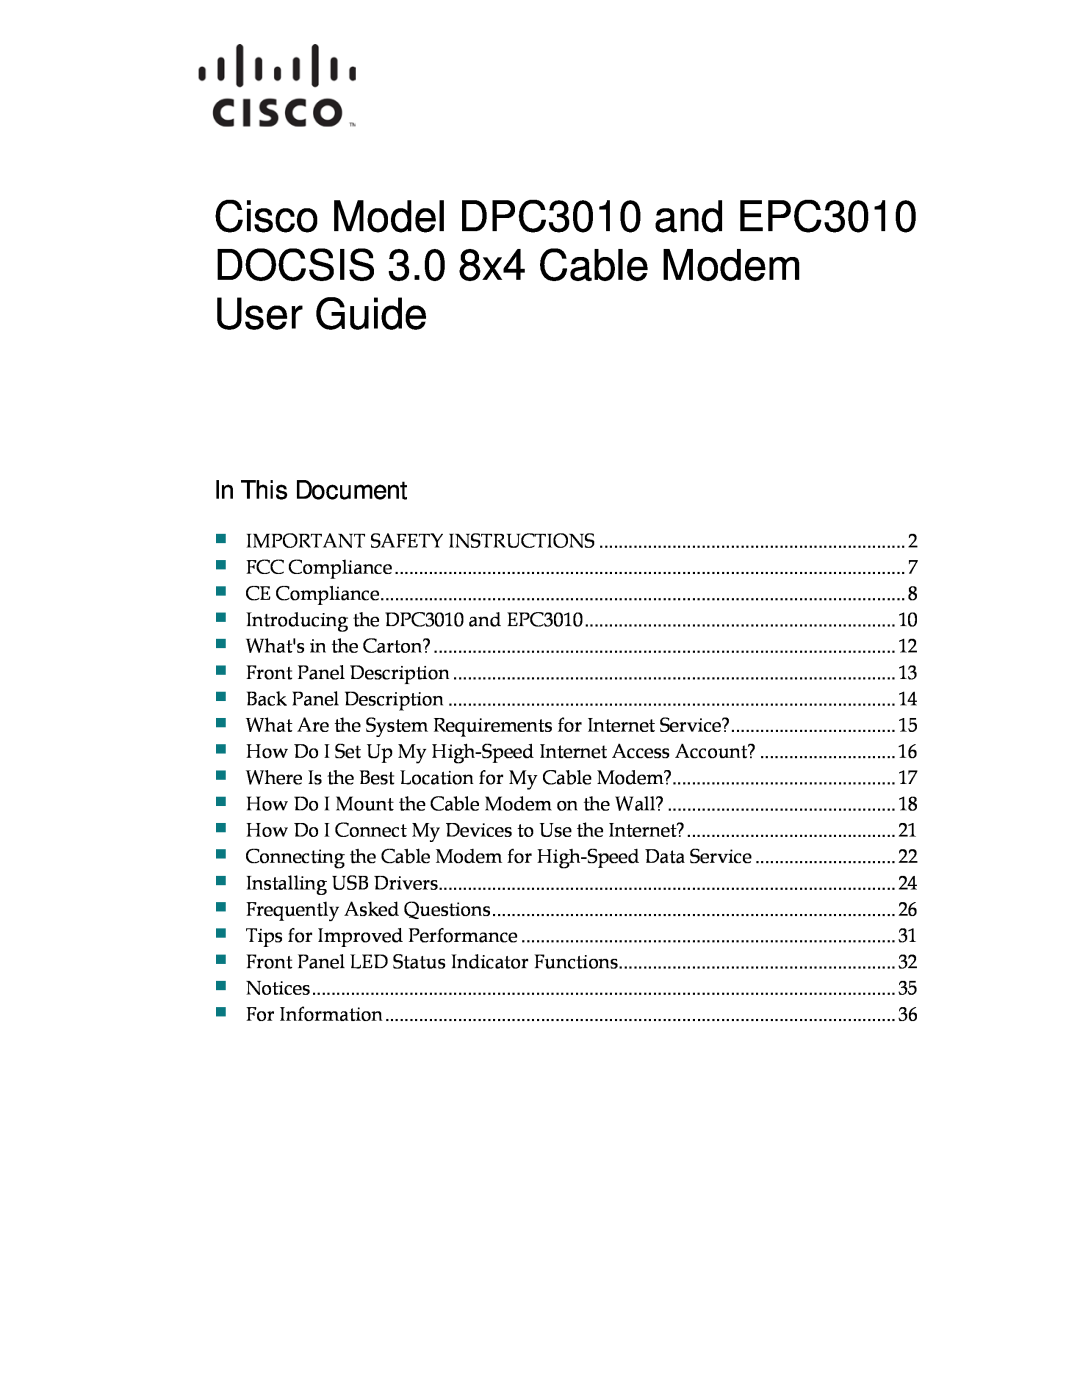 Cisco Systems AAC400210112234 important safety instructions In This Document,                    